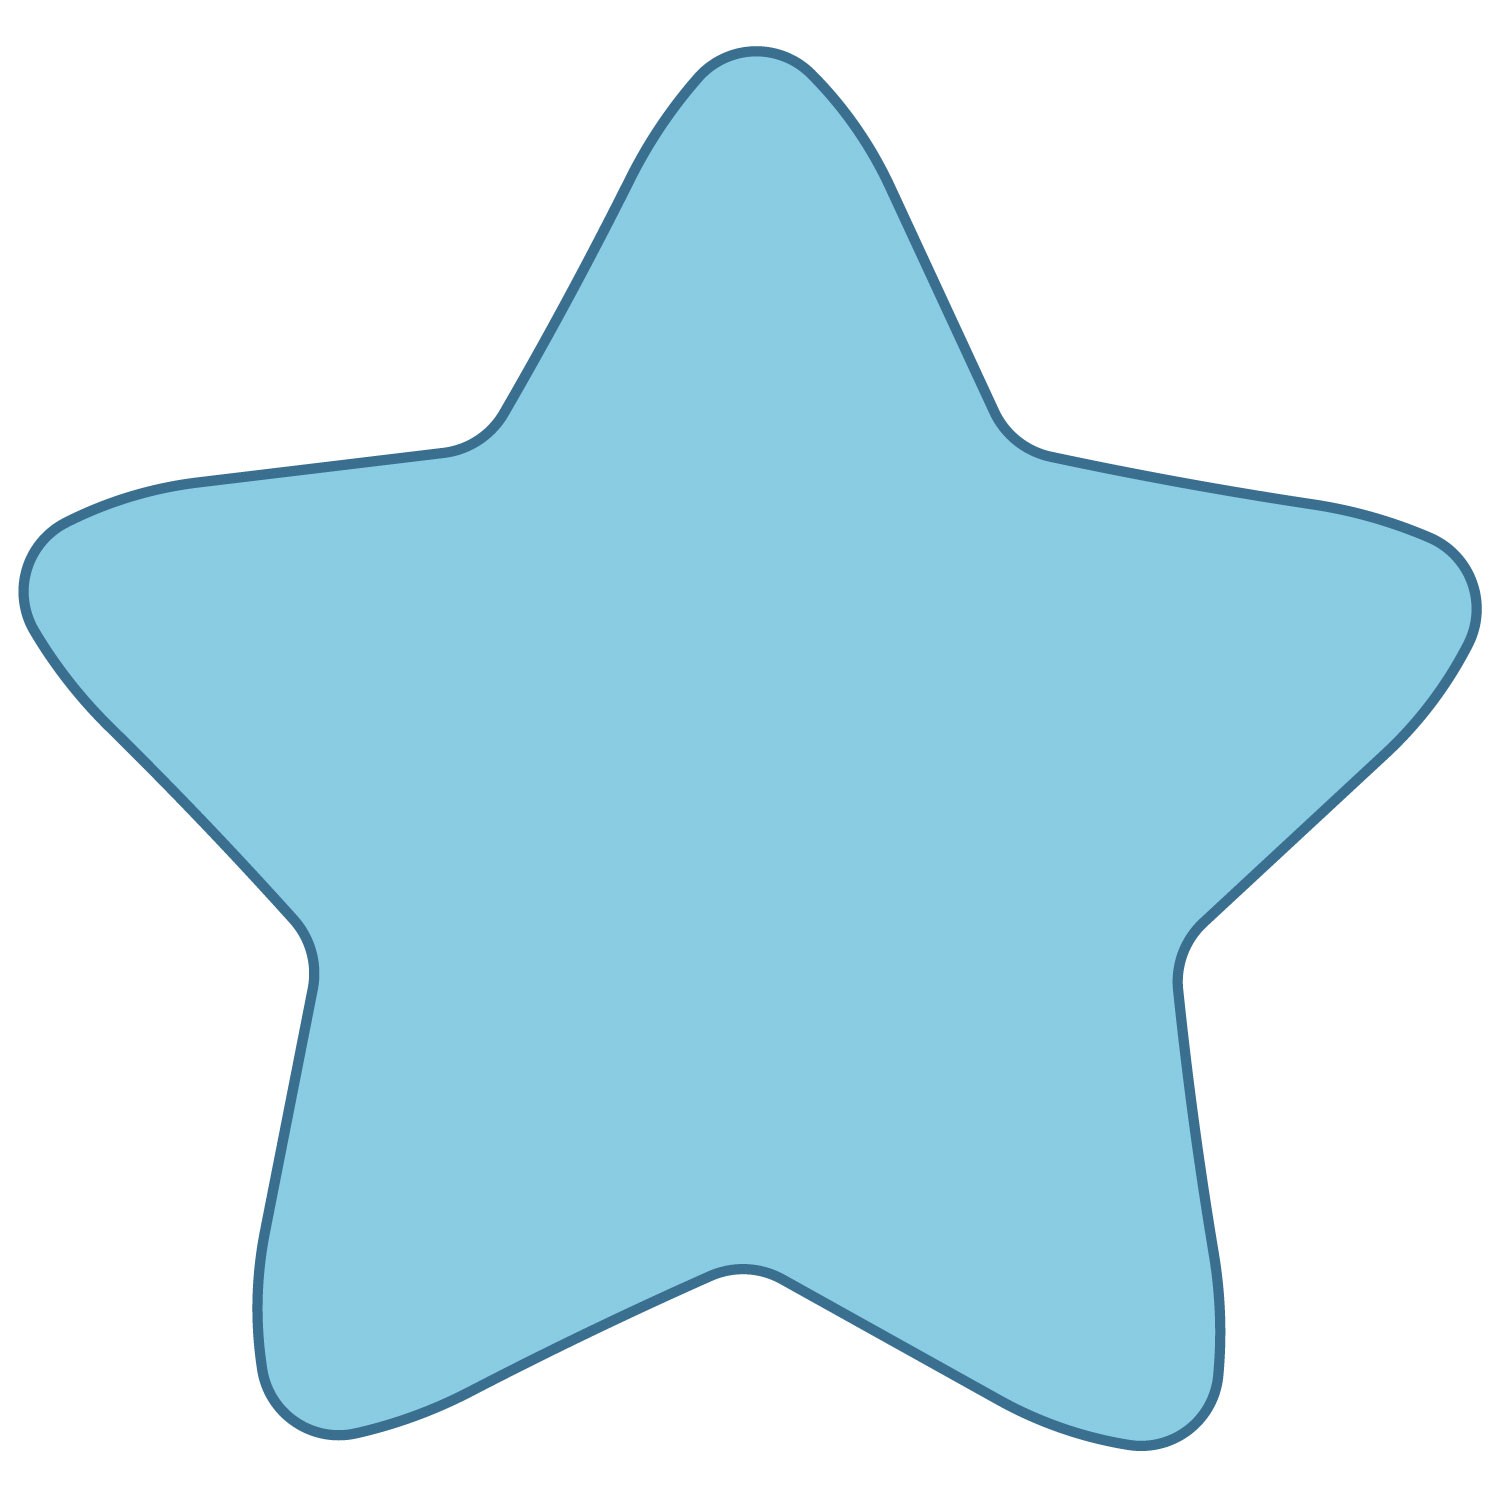 rounded-star-template-clipart-best